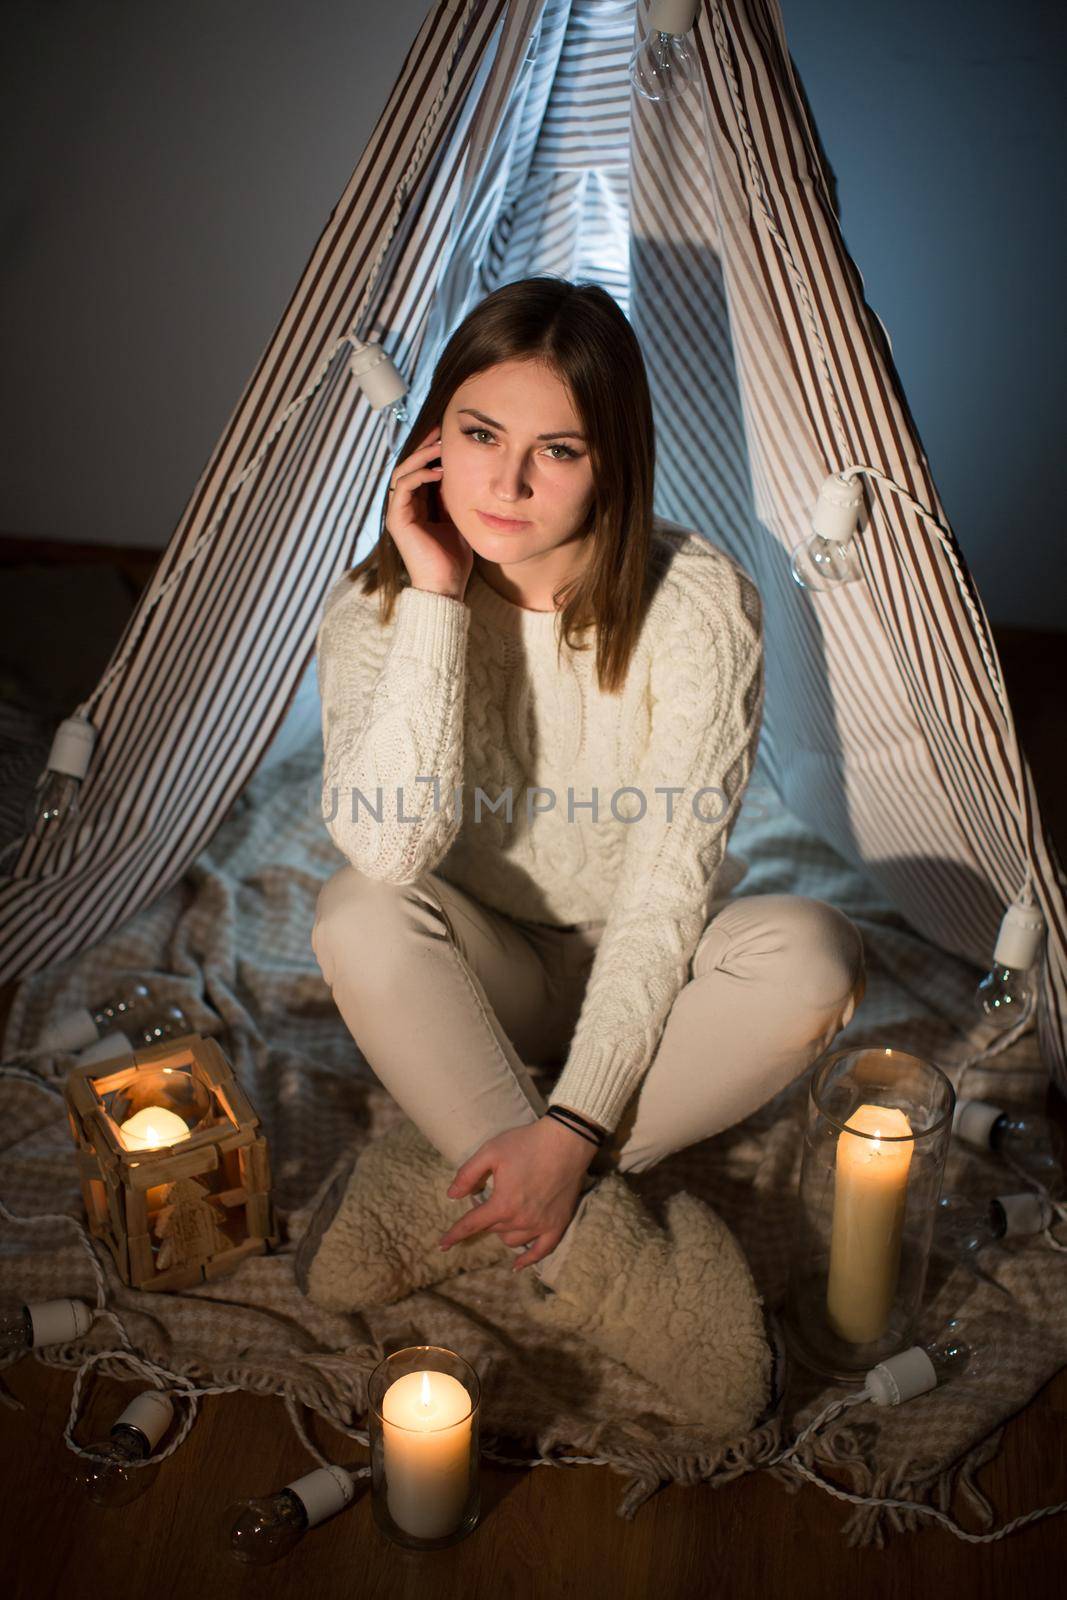 Beautiful girl on Christmas eve, sitting in a comfortable interior. New year. by StudioPeace